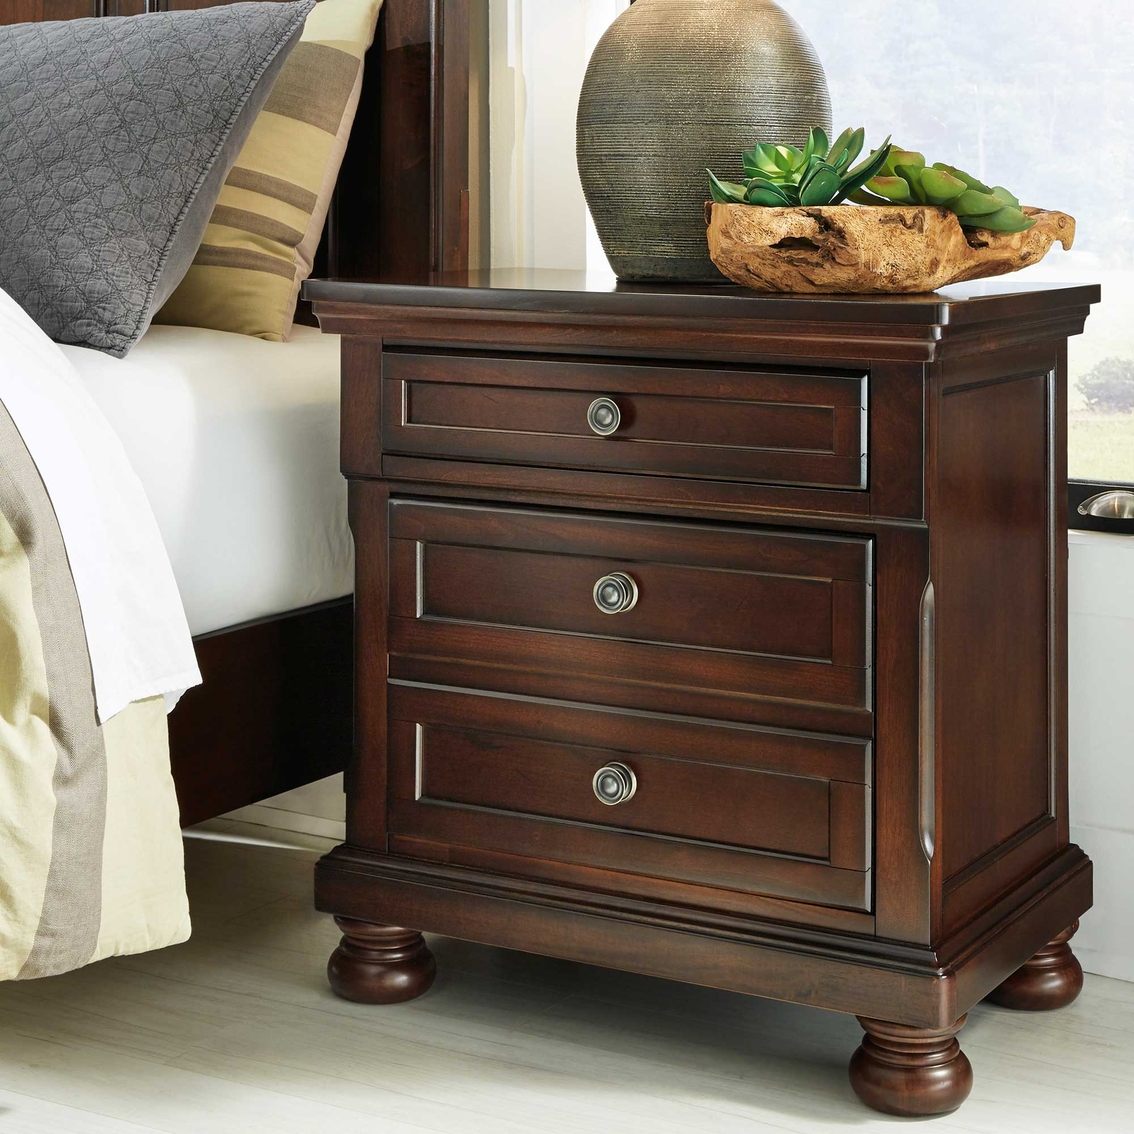 Signature Design by Ashley Porter Nightstand - Image 6 of 7